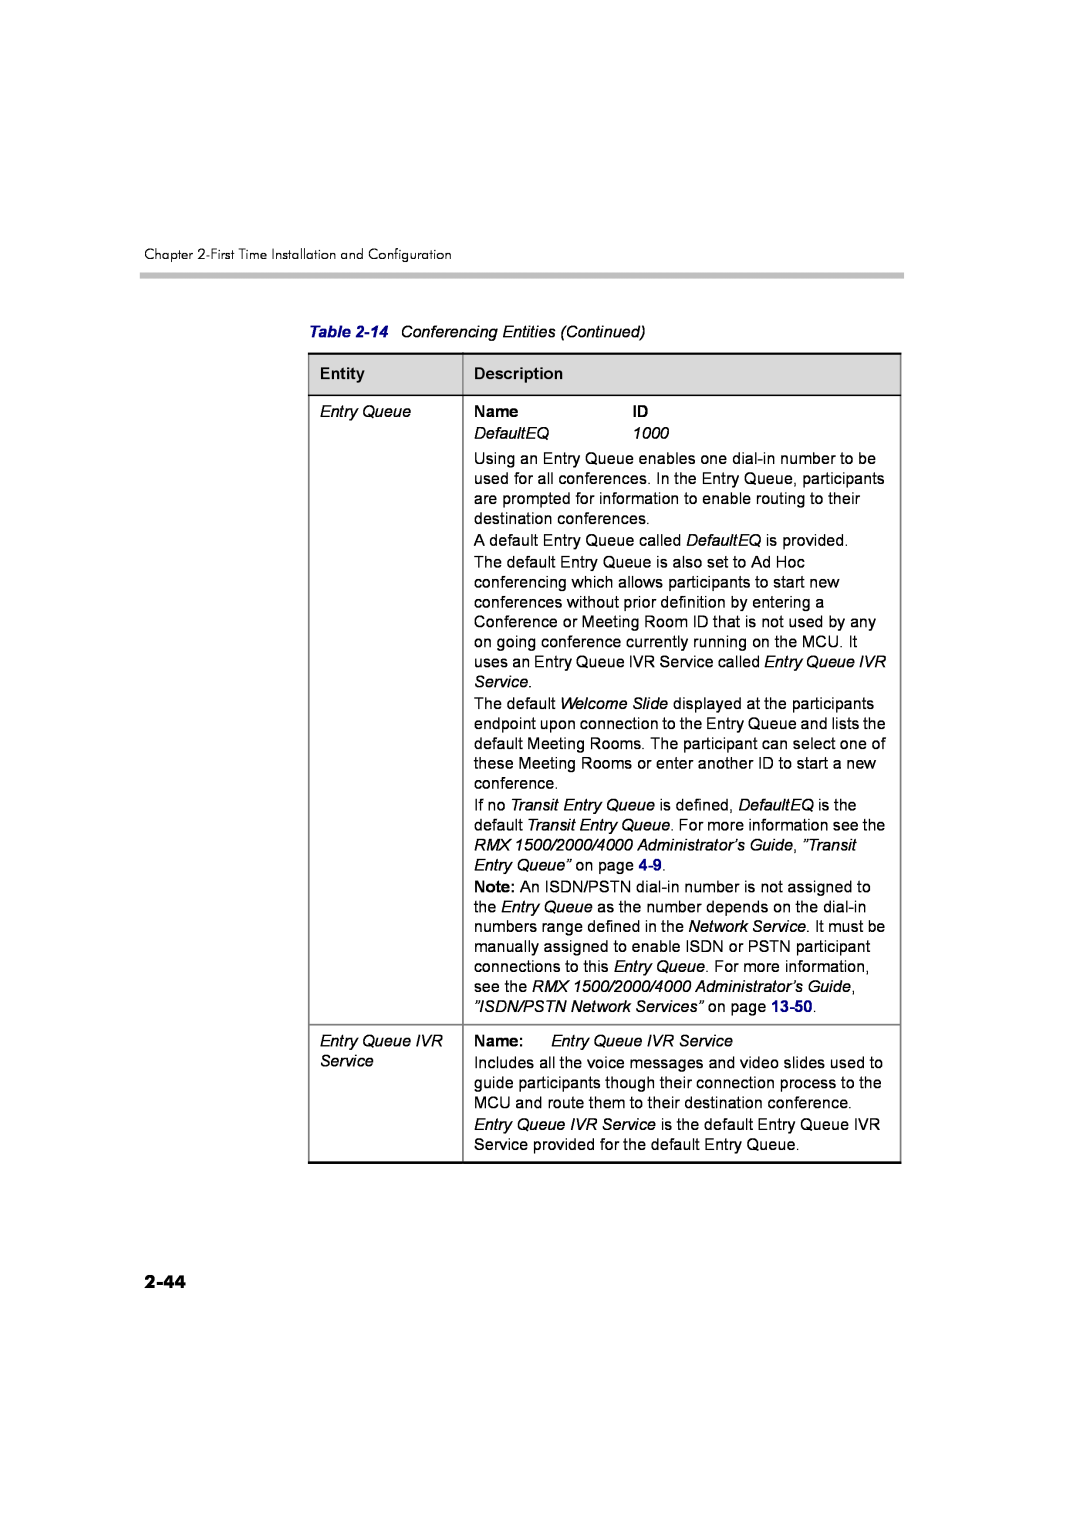 Polycom DOC2560B manual 2-44, Entity, Description, Name, endpoint upon connection to the Entry Queue and lists the 